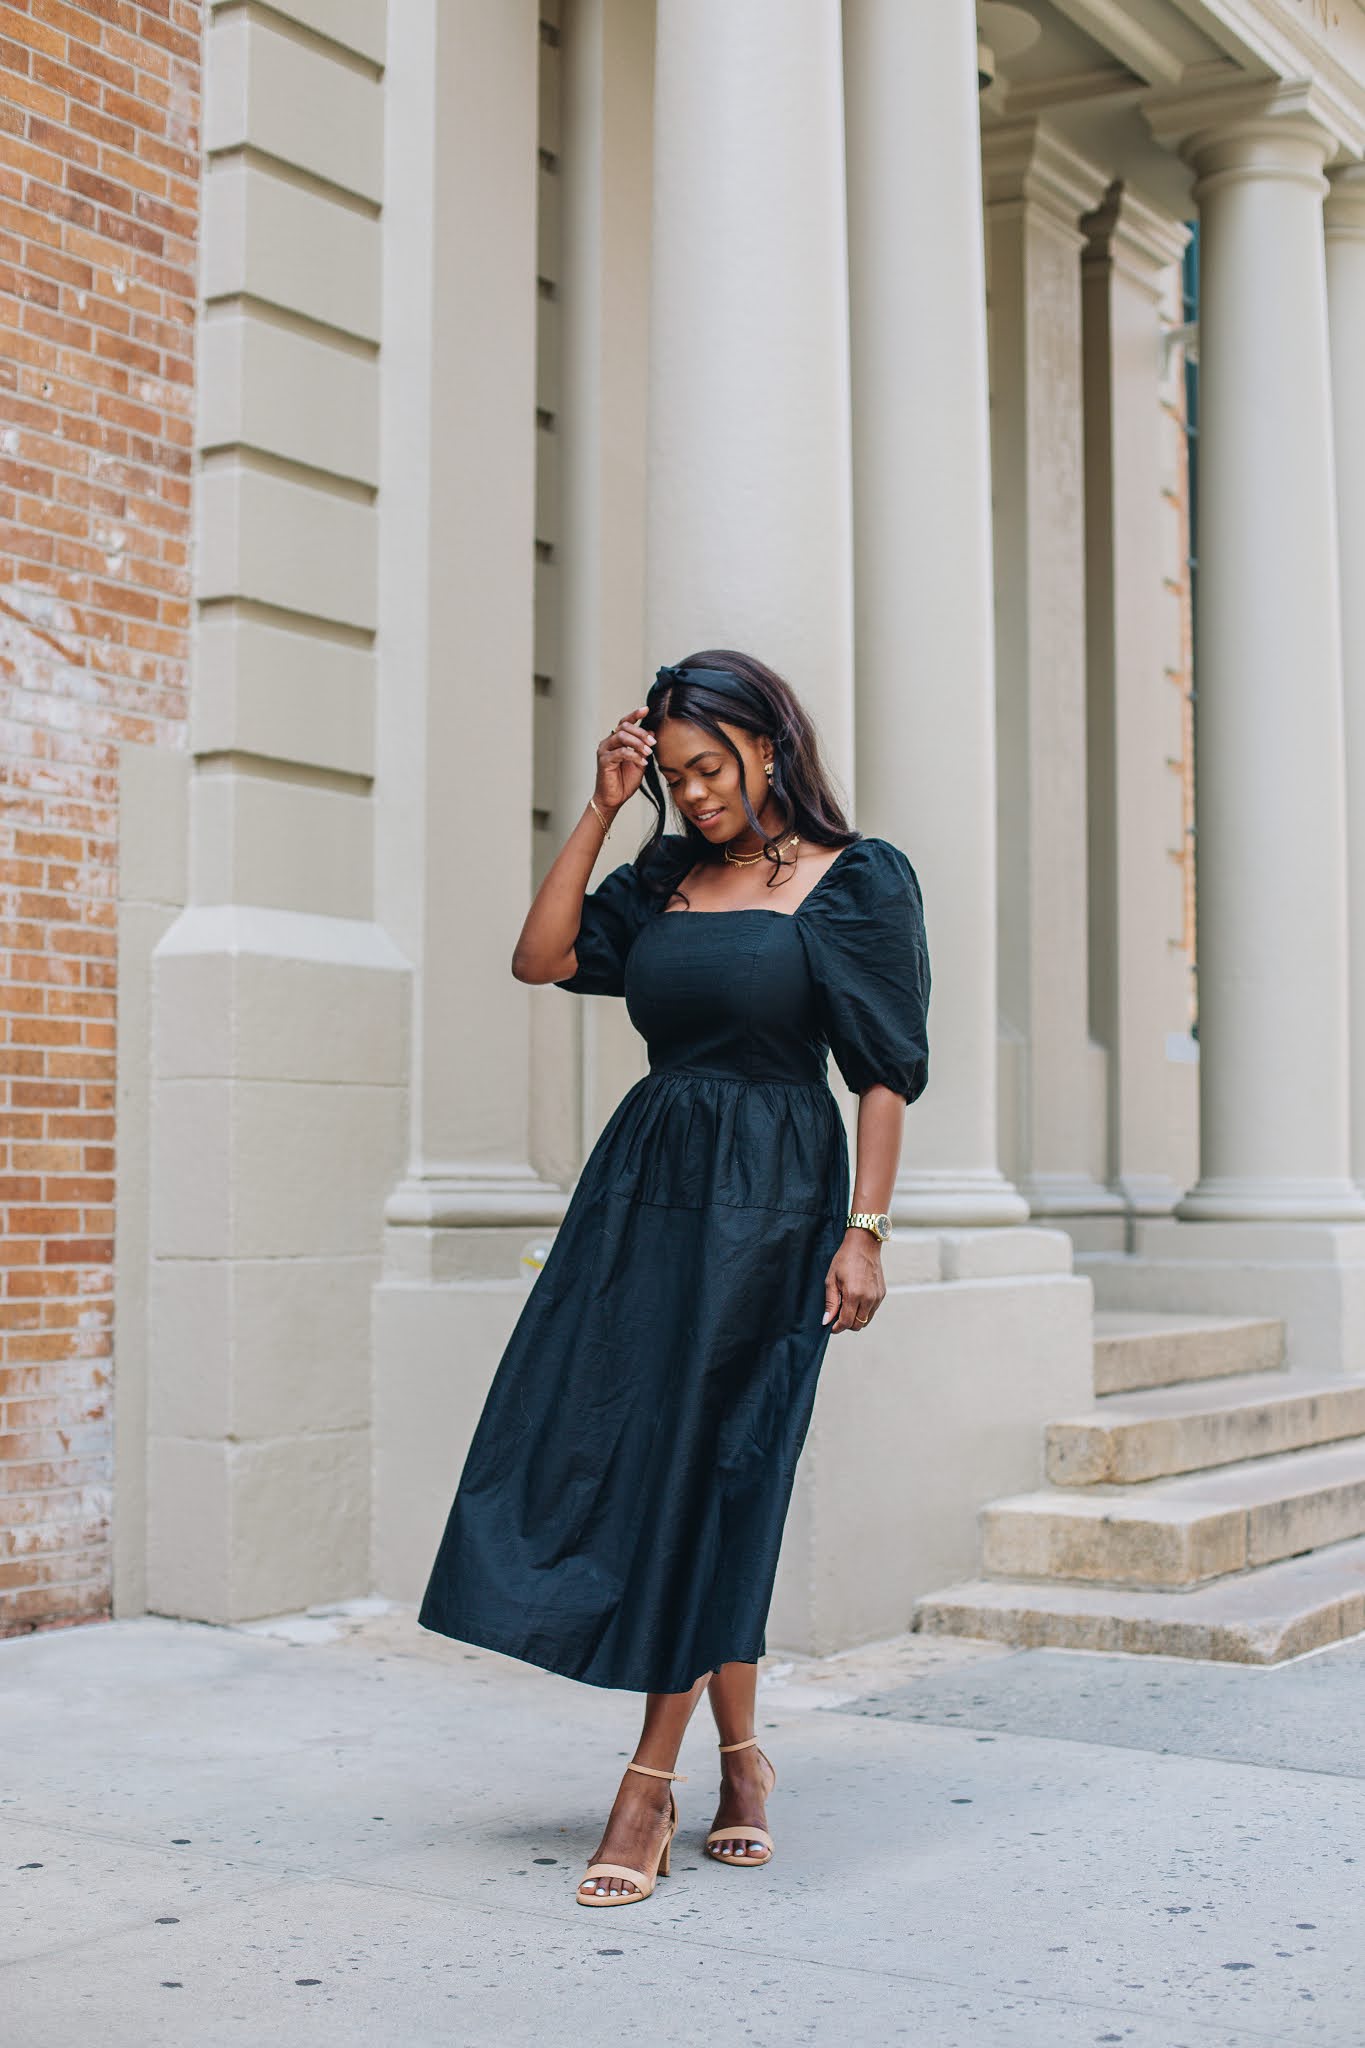 The most flattering necklines for your bust shape - Lookiero Blog